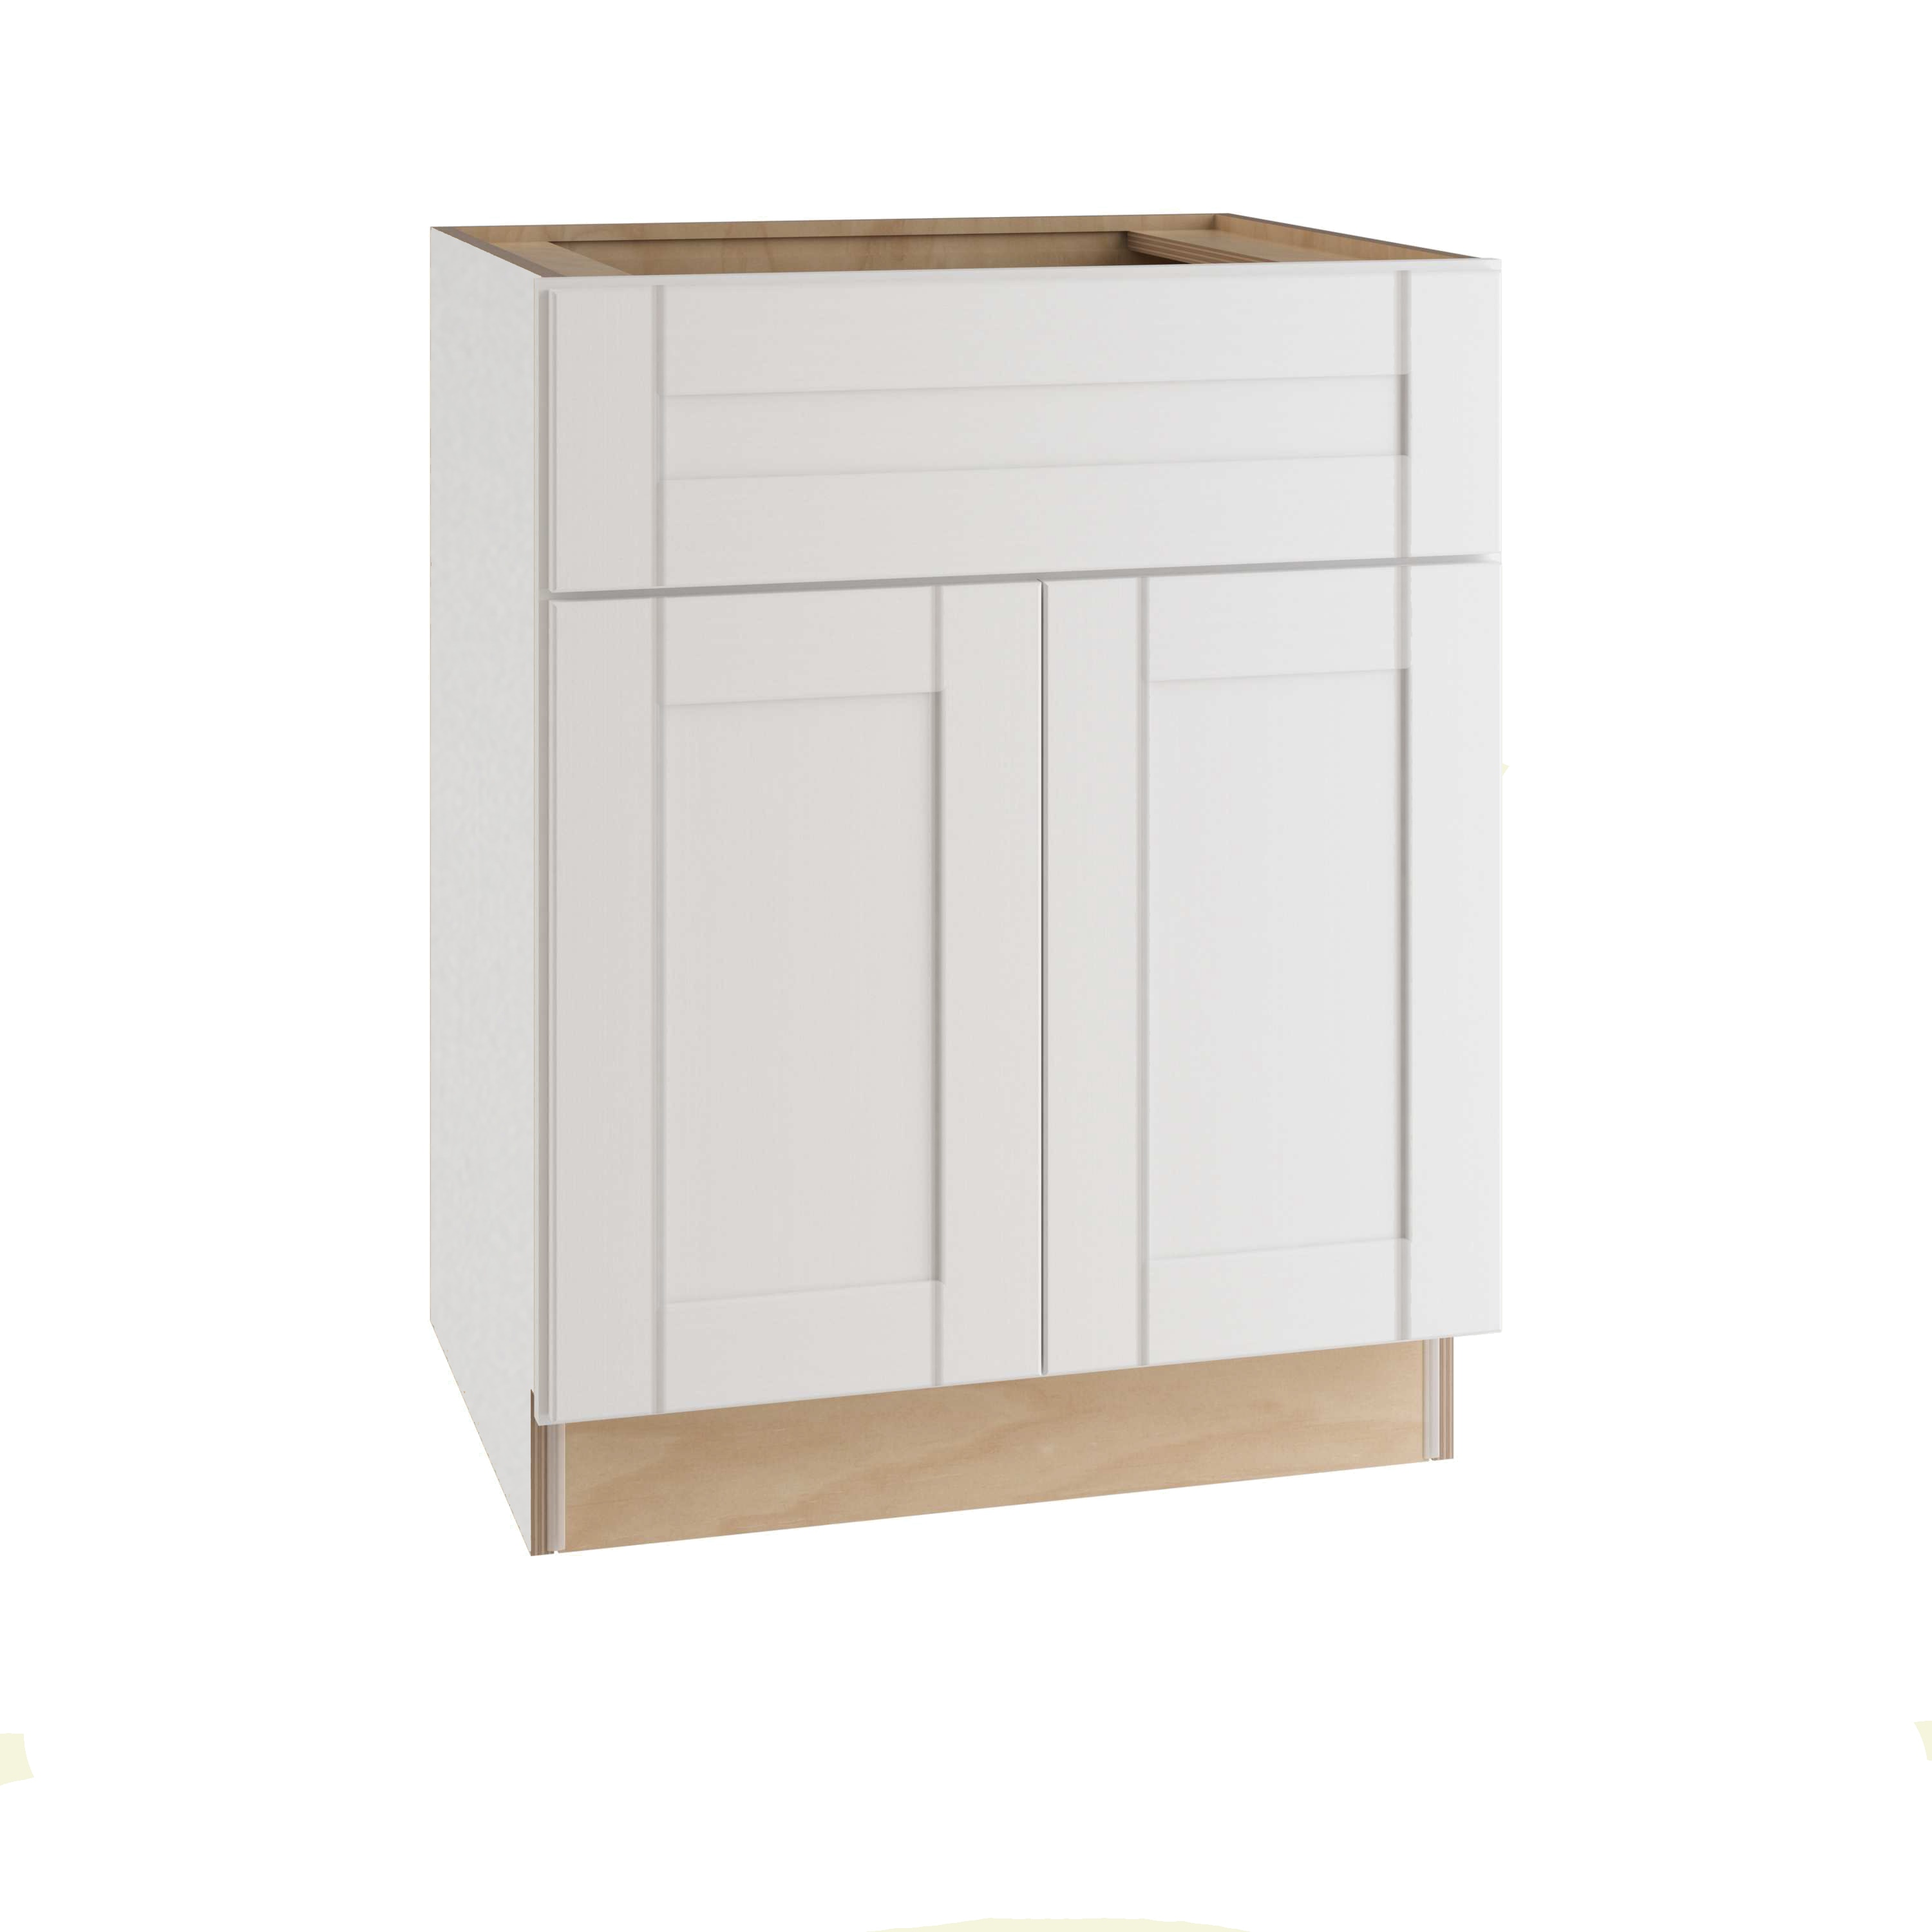 Lue Cabinetry Waldorf 30 In W X 34 5 H 24 D Vibrant White Door And Drawer Base Fully Assembled Plywood Cabinet Recessed Panel Shaker Style The Kitchen Cabinets Department At